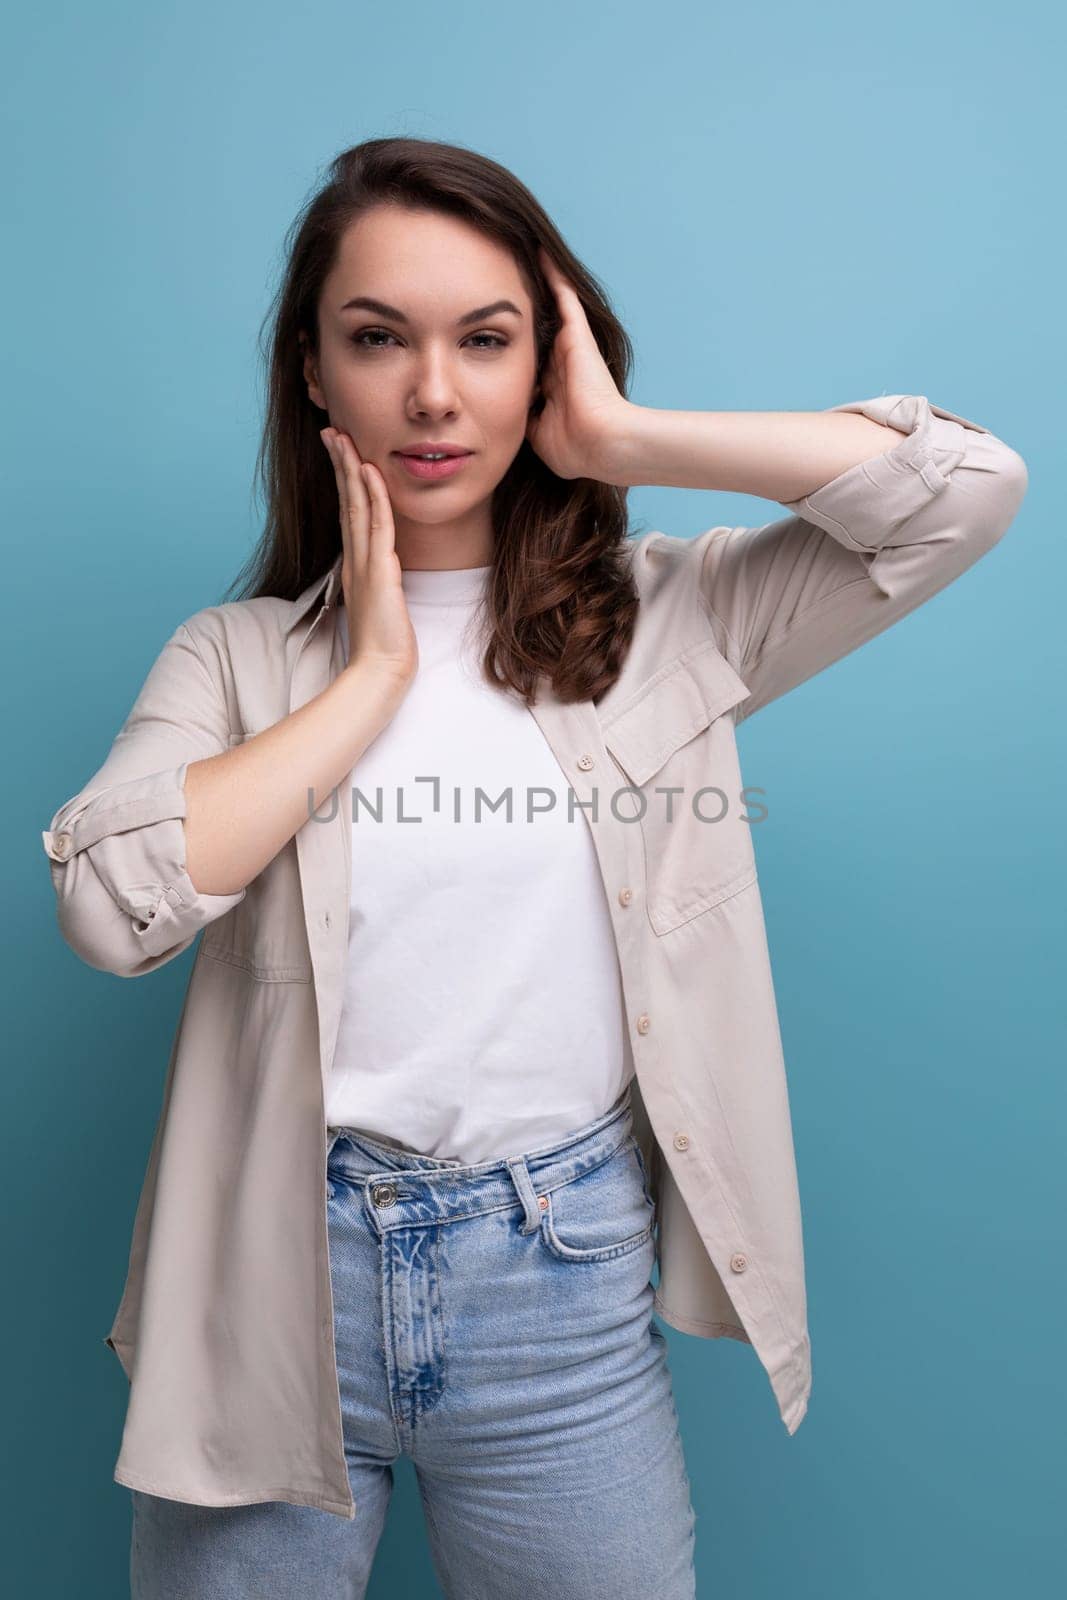 charming young brunette female adult in casual shirt.